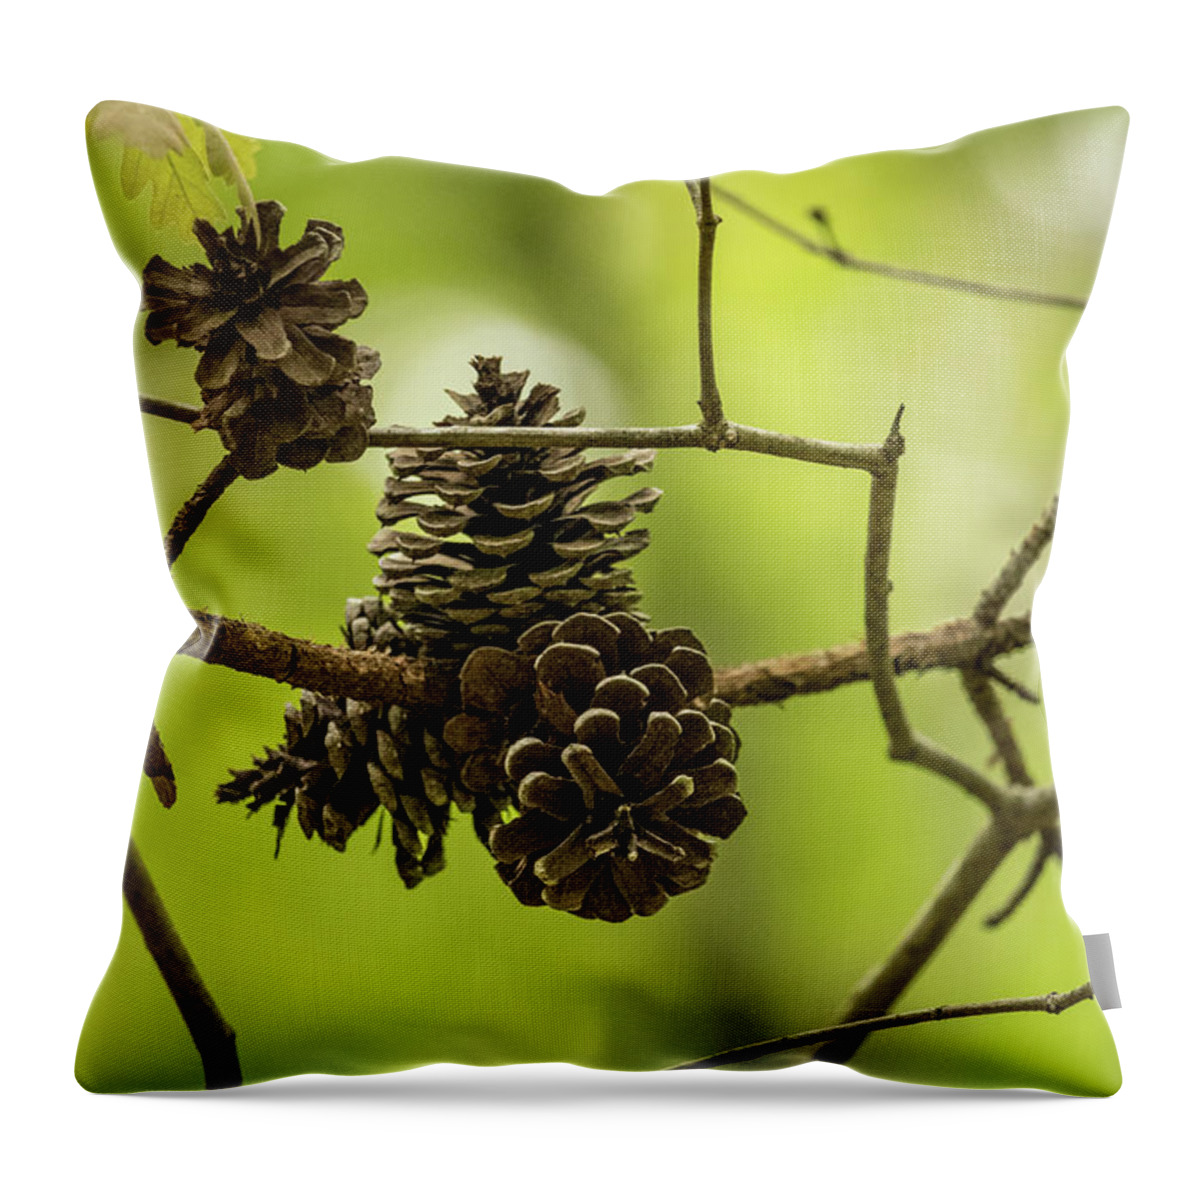 Cone Throw Pillow featuring the photograph Pine Cones by Rick Nelson